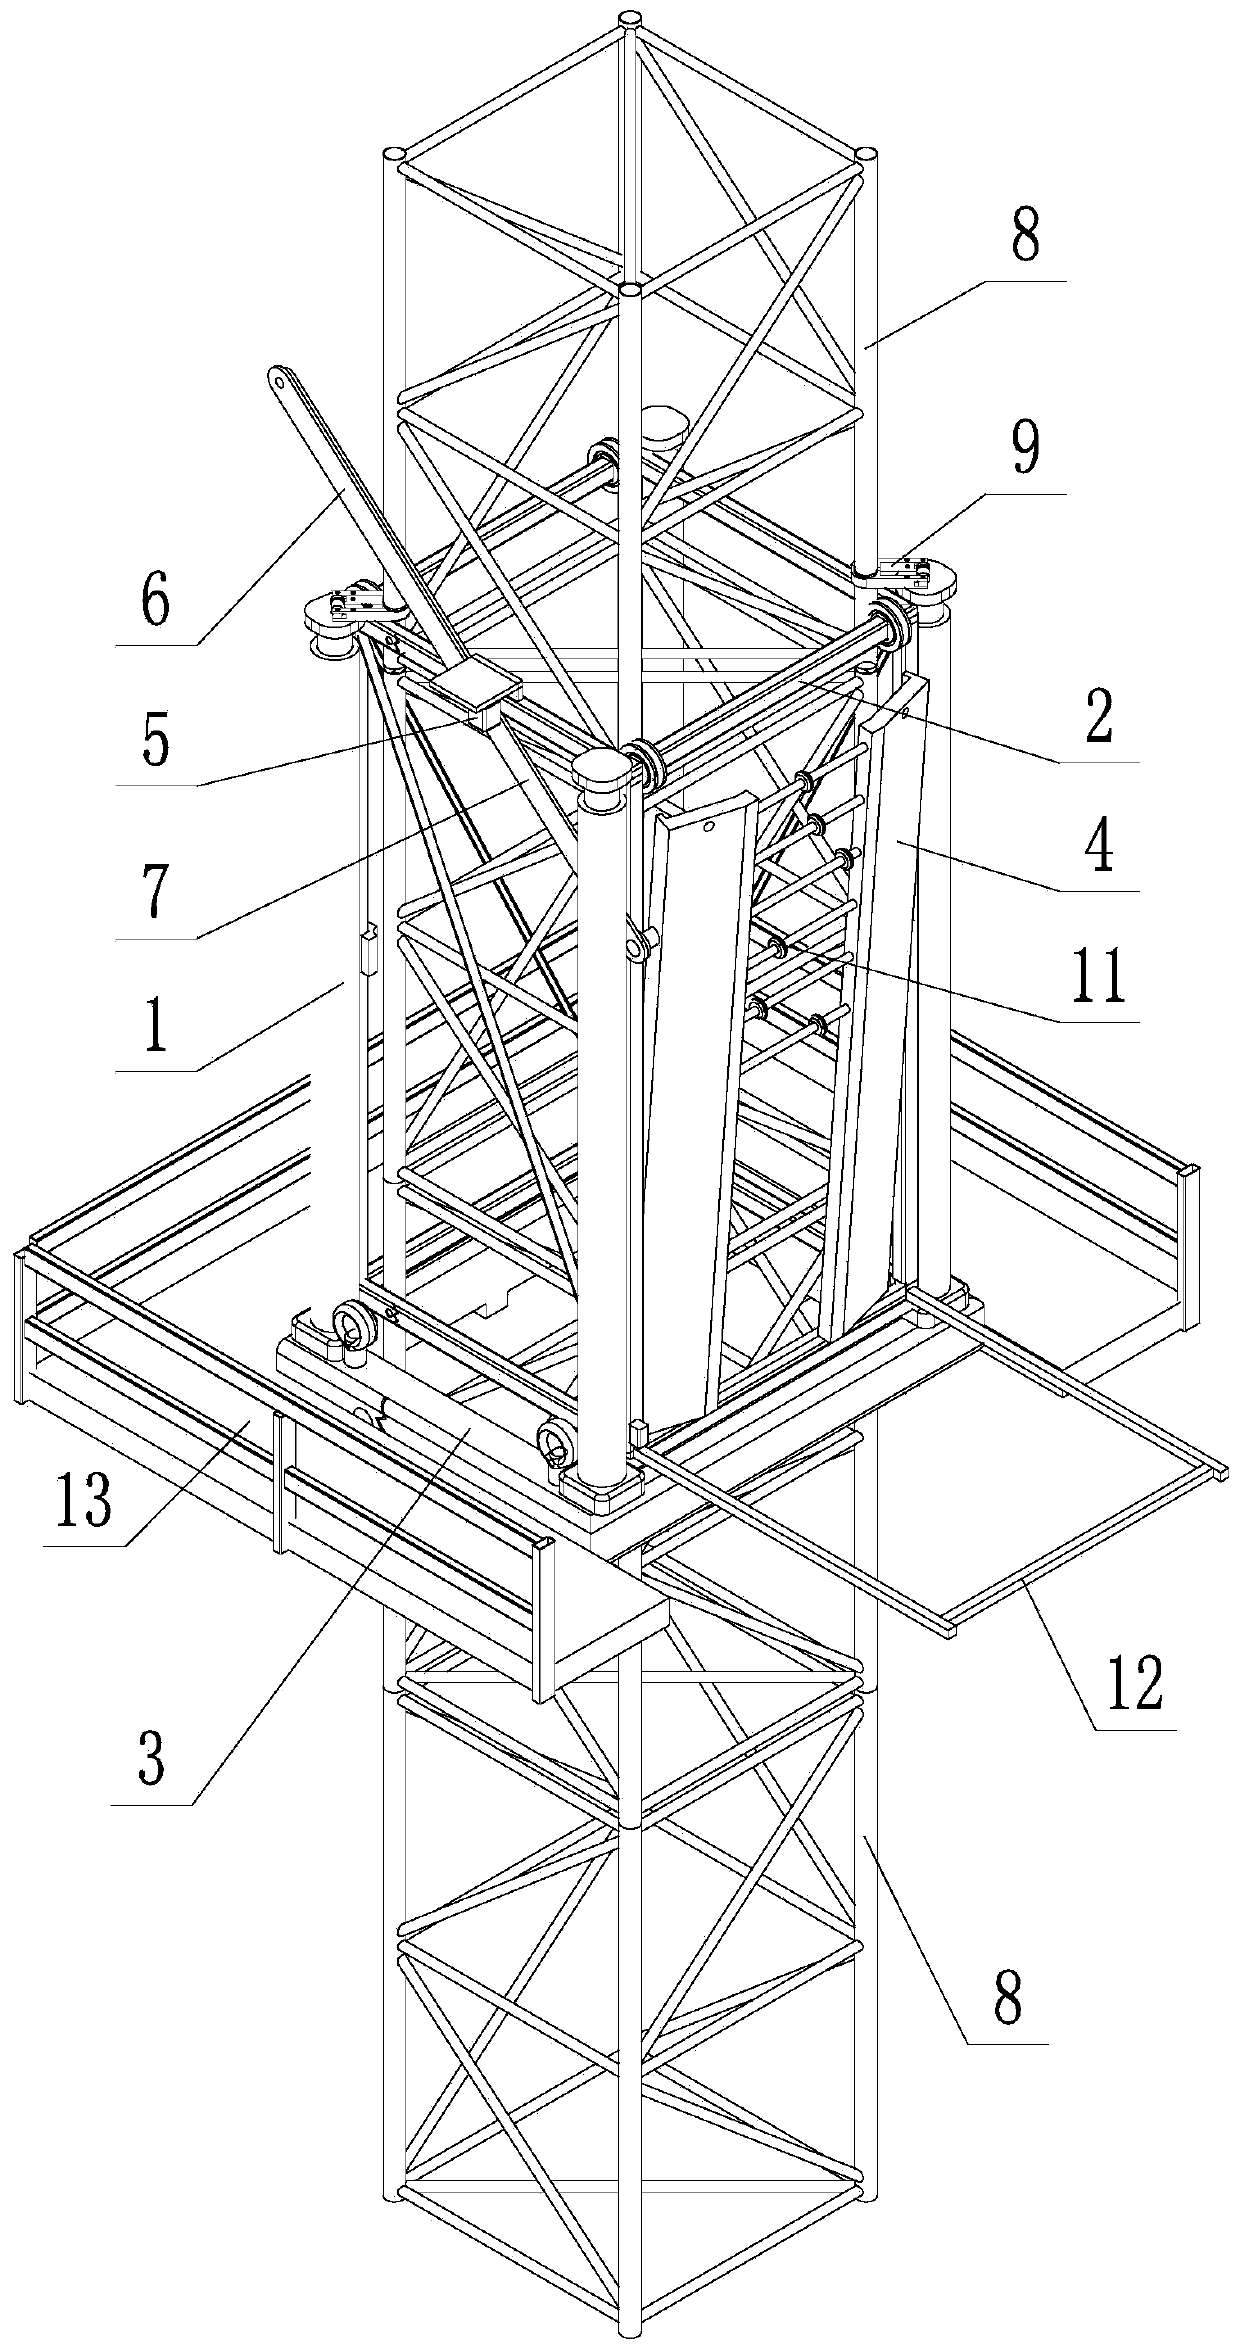 Automatic jacking in-place device and method for tower crane standard section